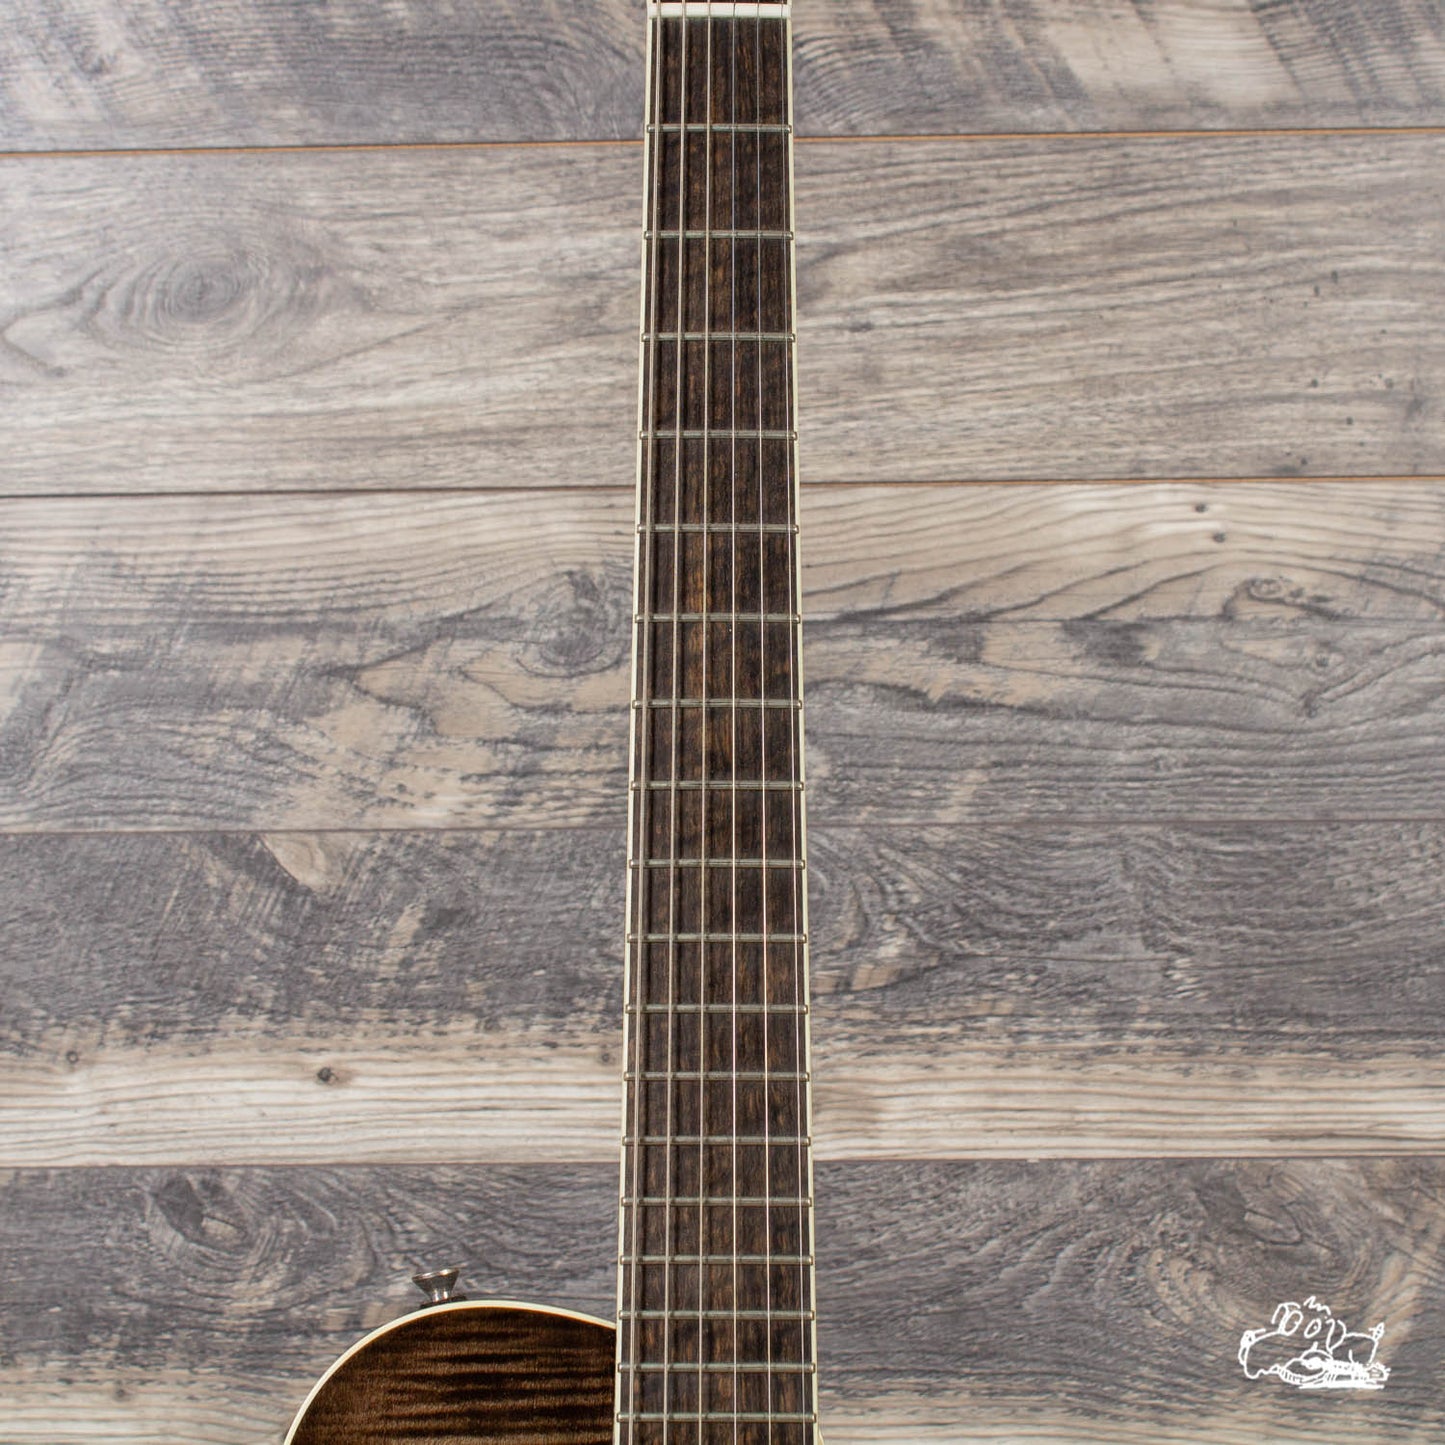 2016 Collings City Limits Deluxe - Charcoal Burst